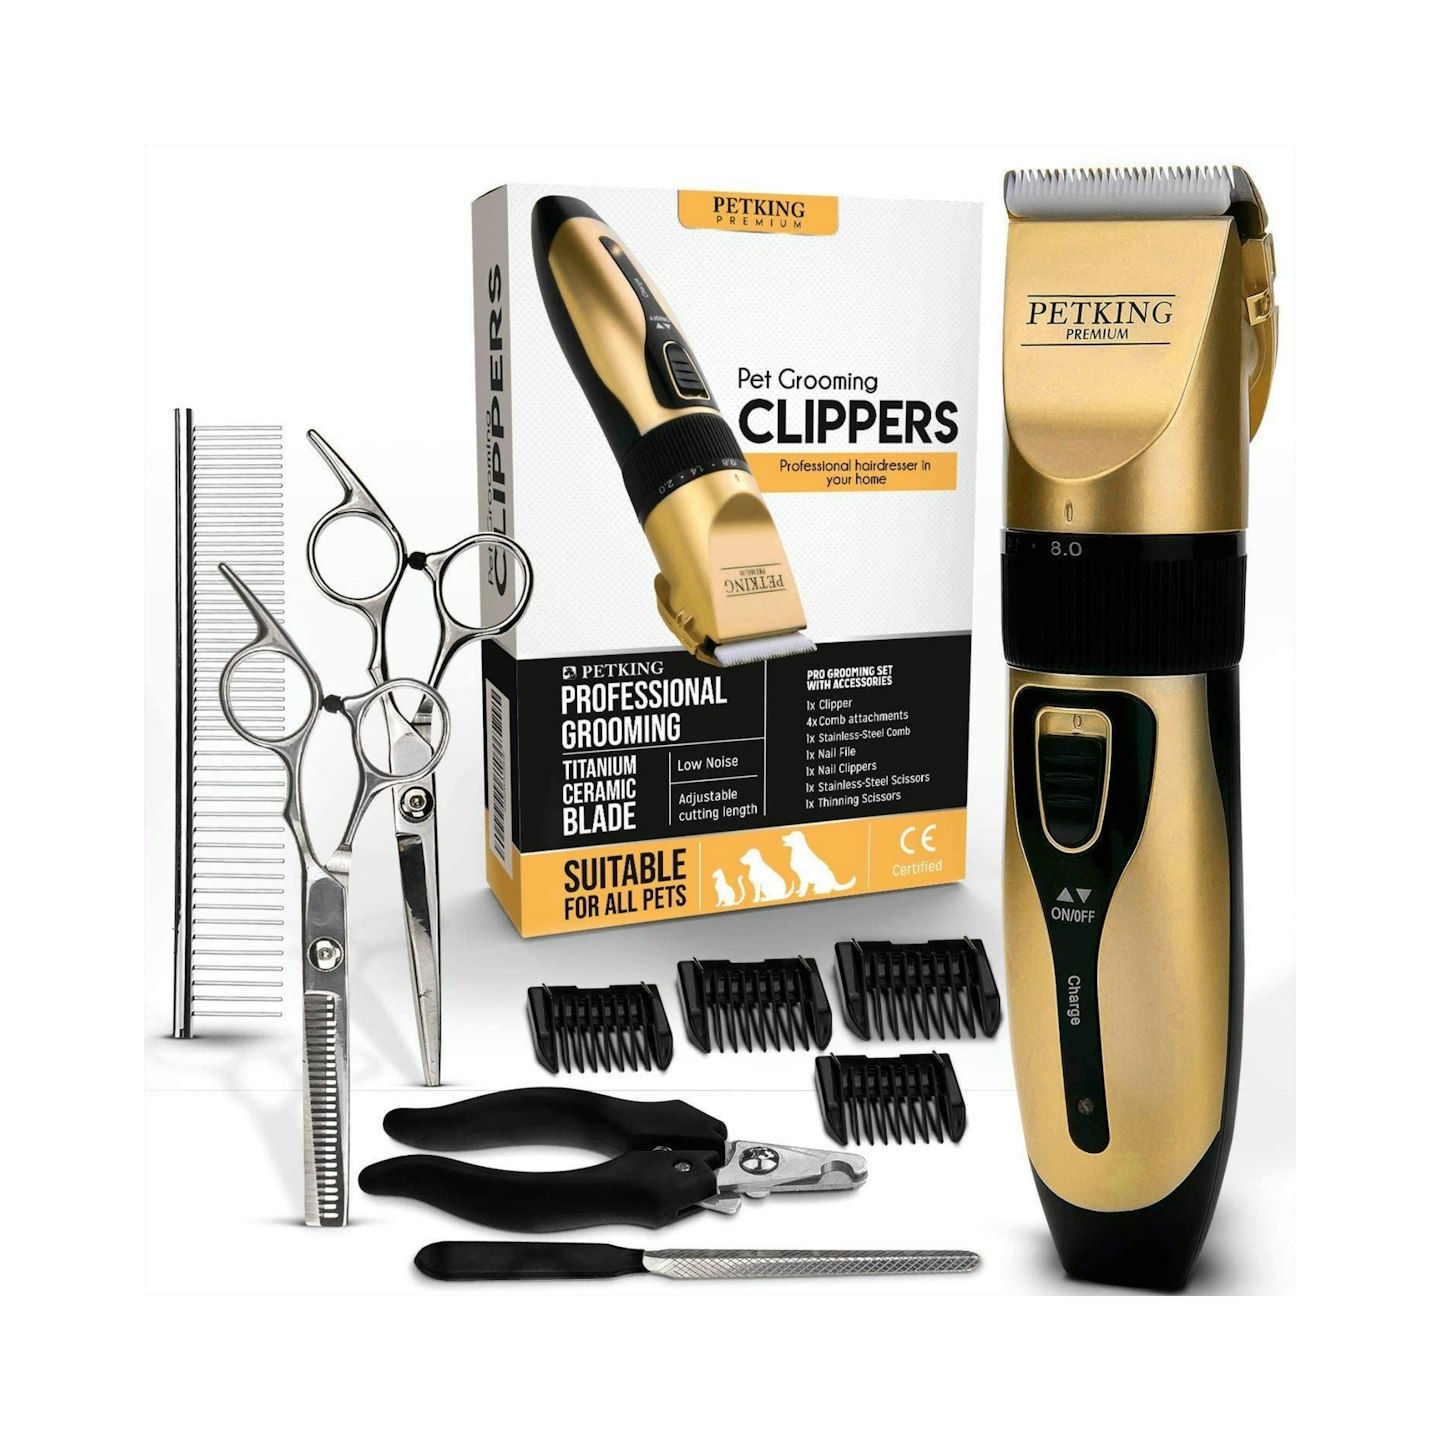 PETKING Dog Grooming Clippers